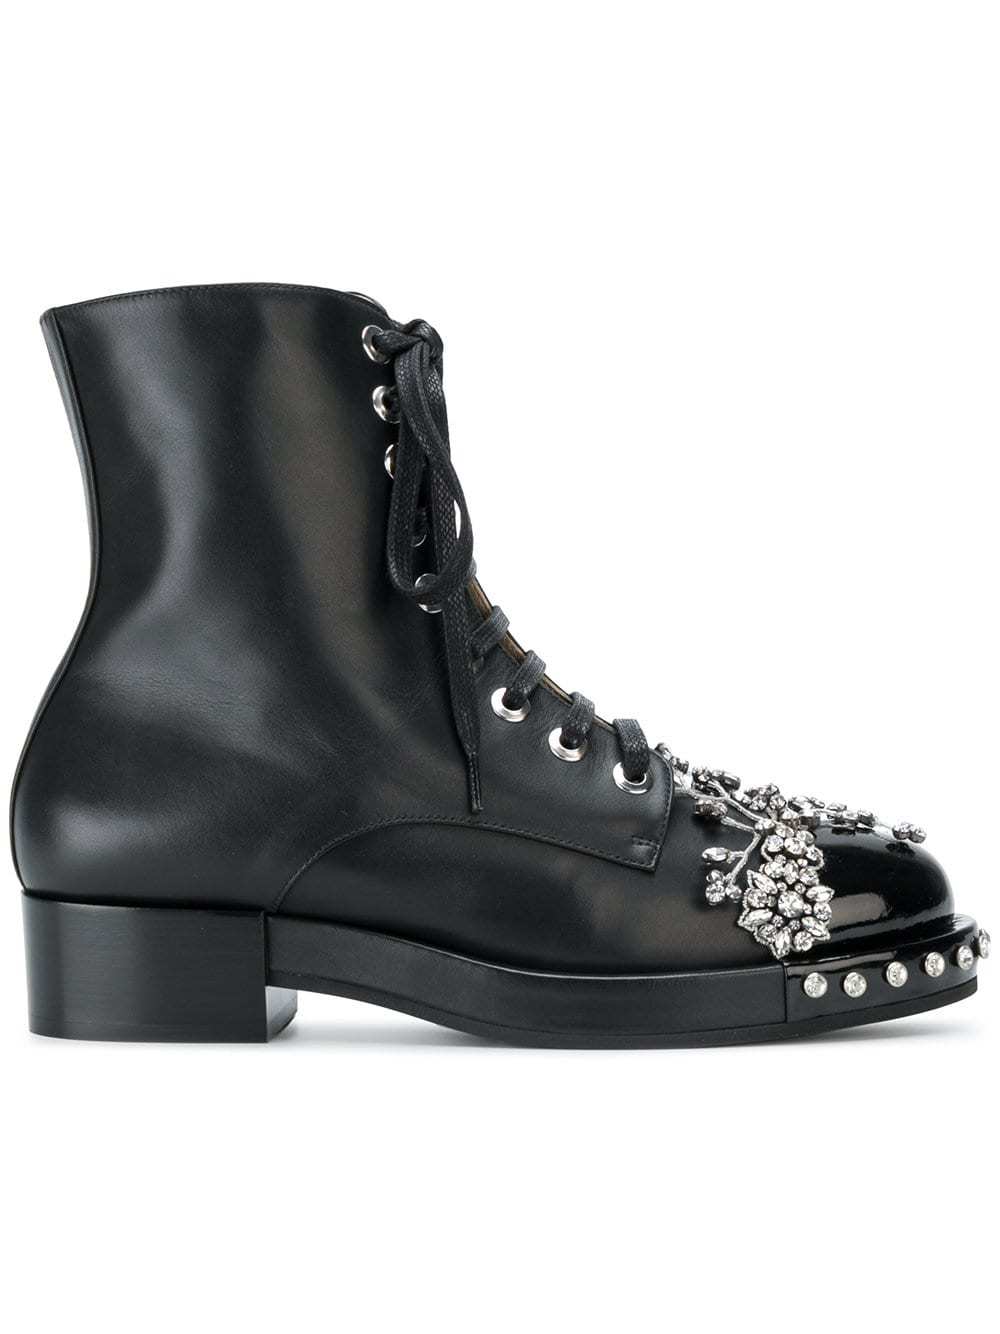 N°21 N21 Embellished Ankle Boots, $585 | farfetch.com | Lookastic